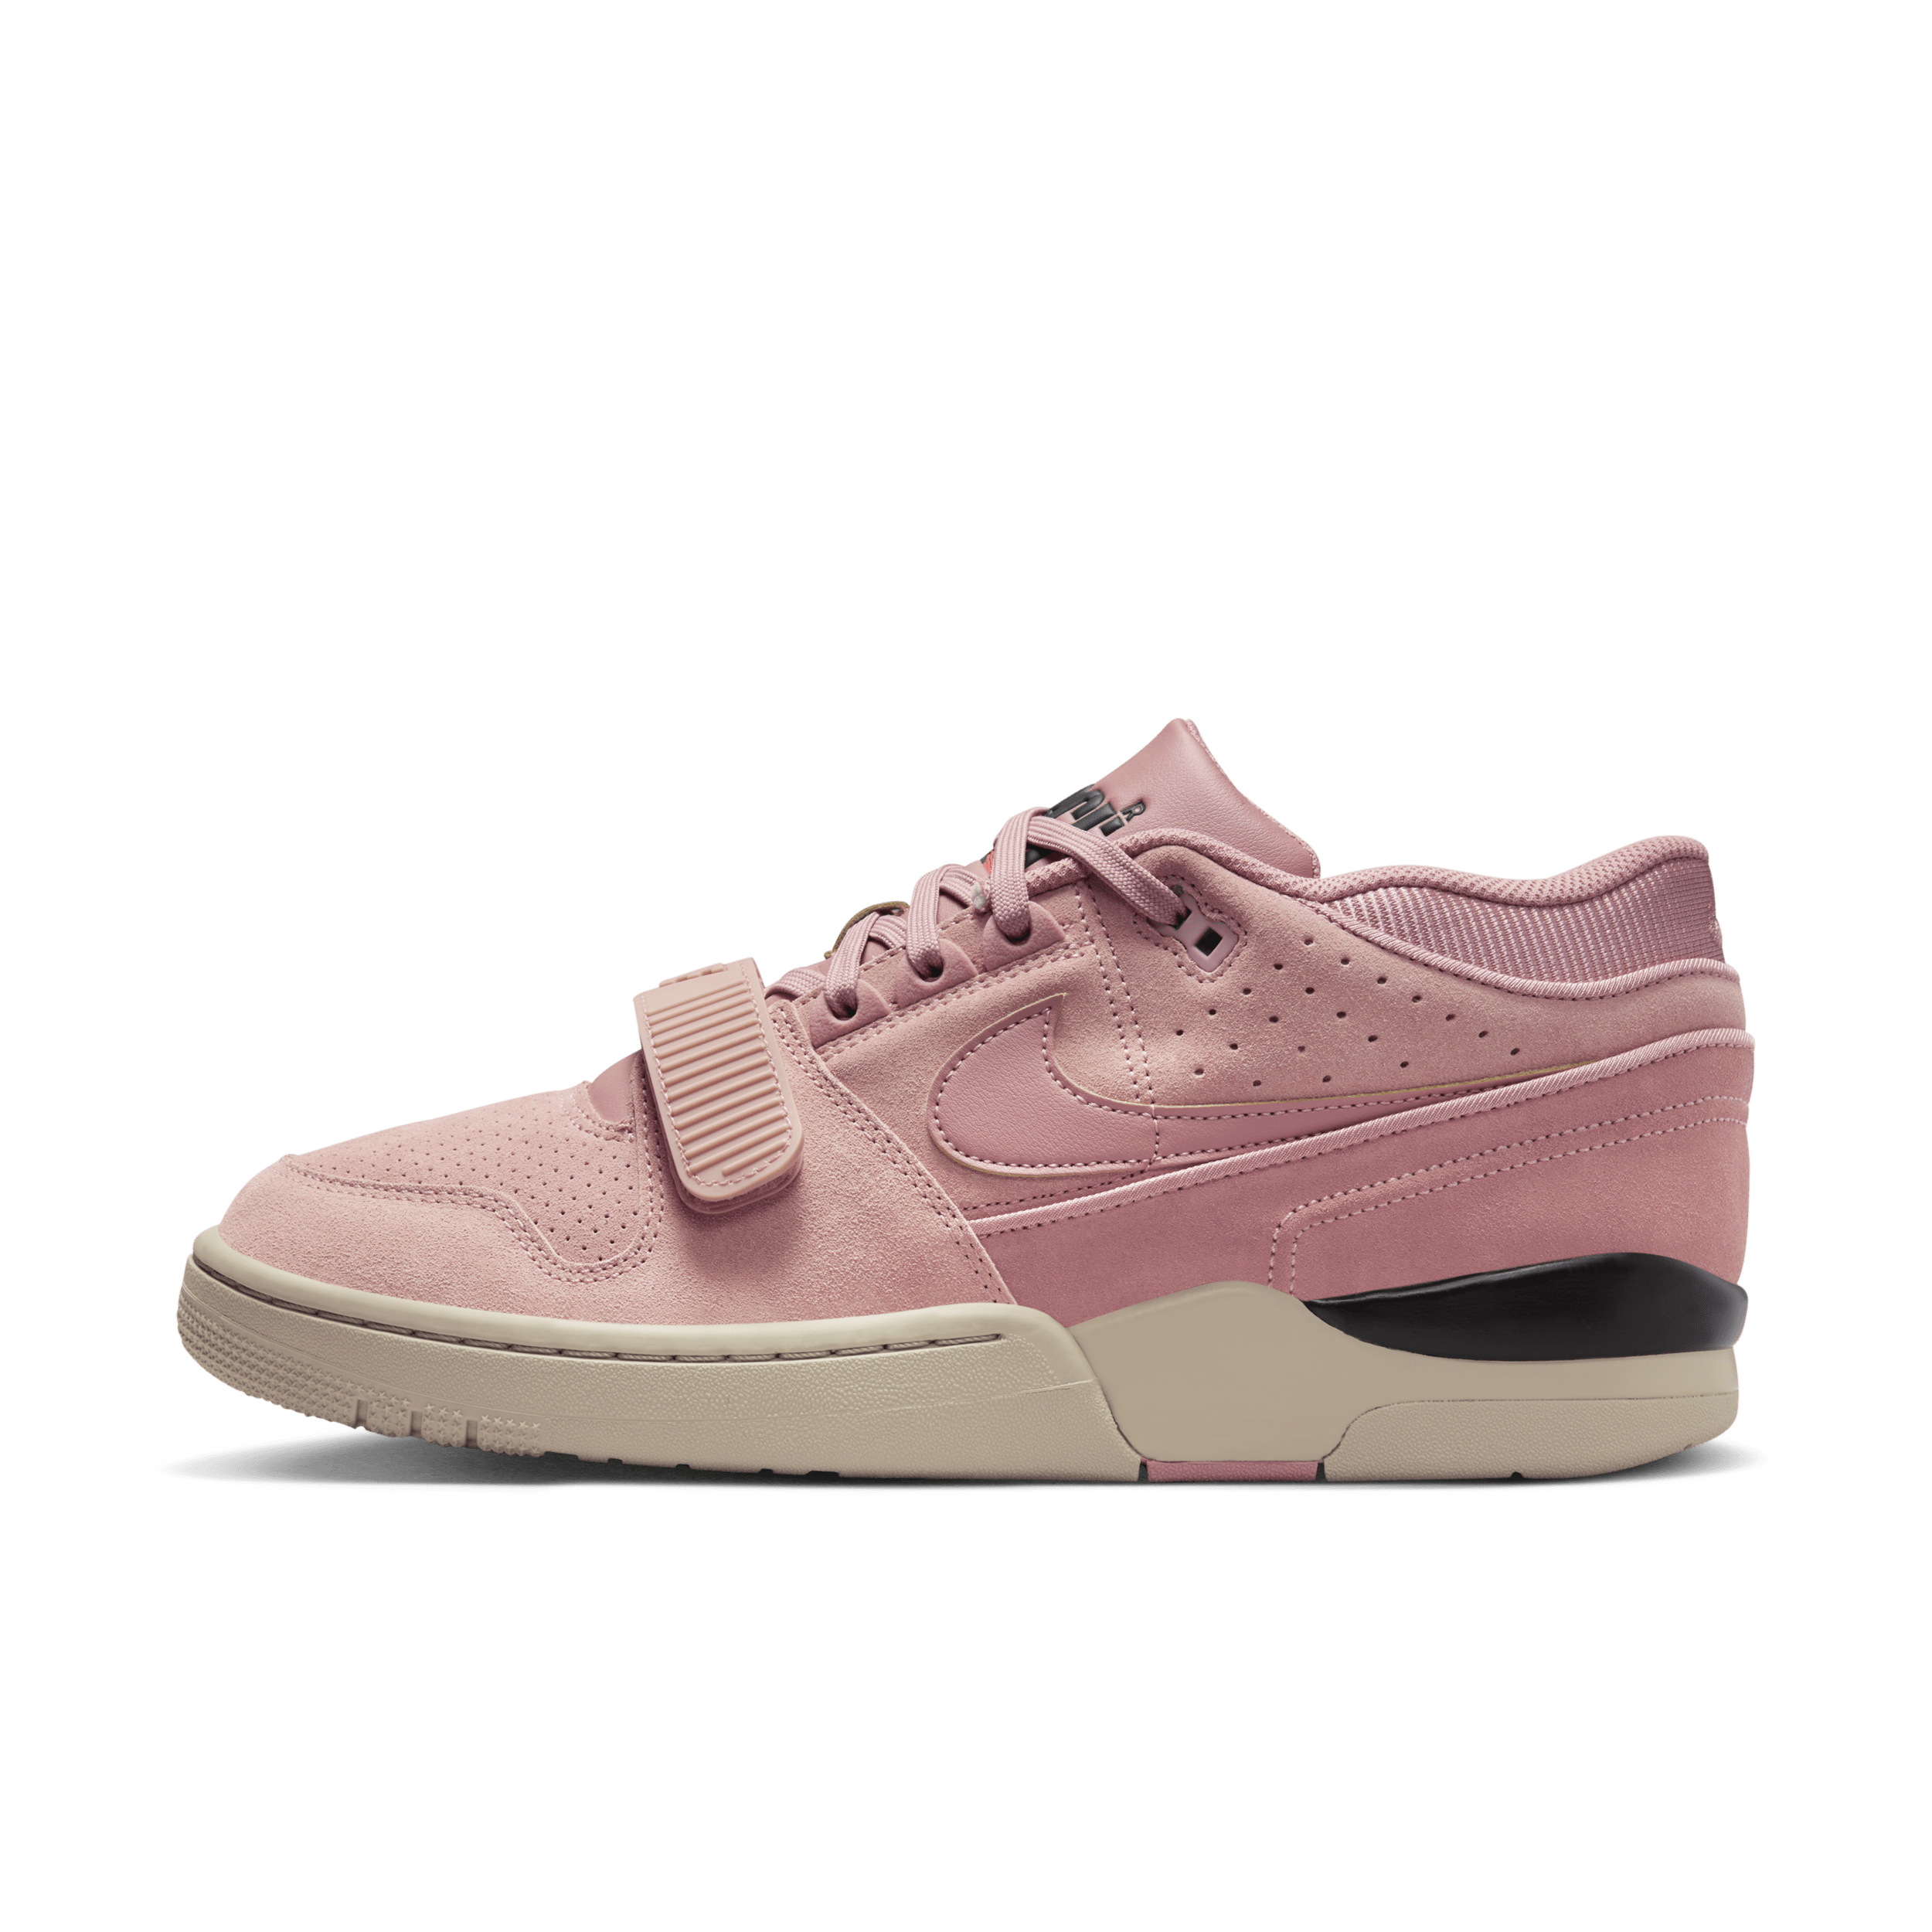 Chaussure Nike Air Alpha Force 88 Low pour homme - Rose